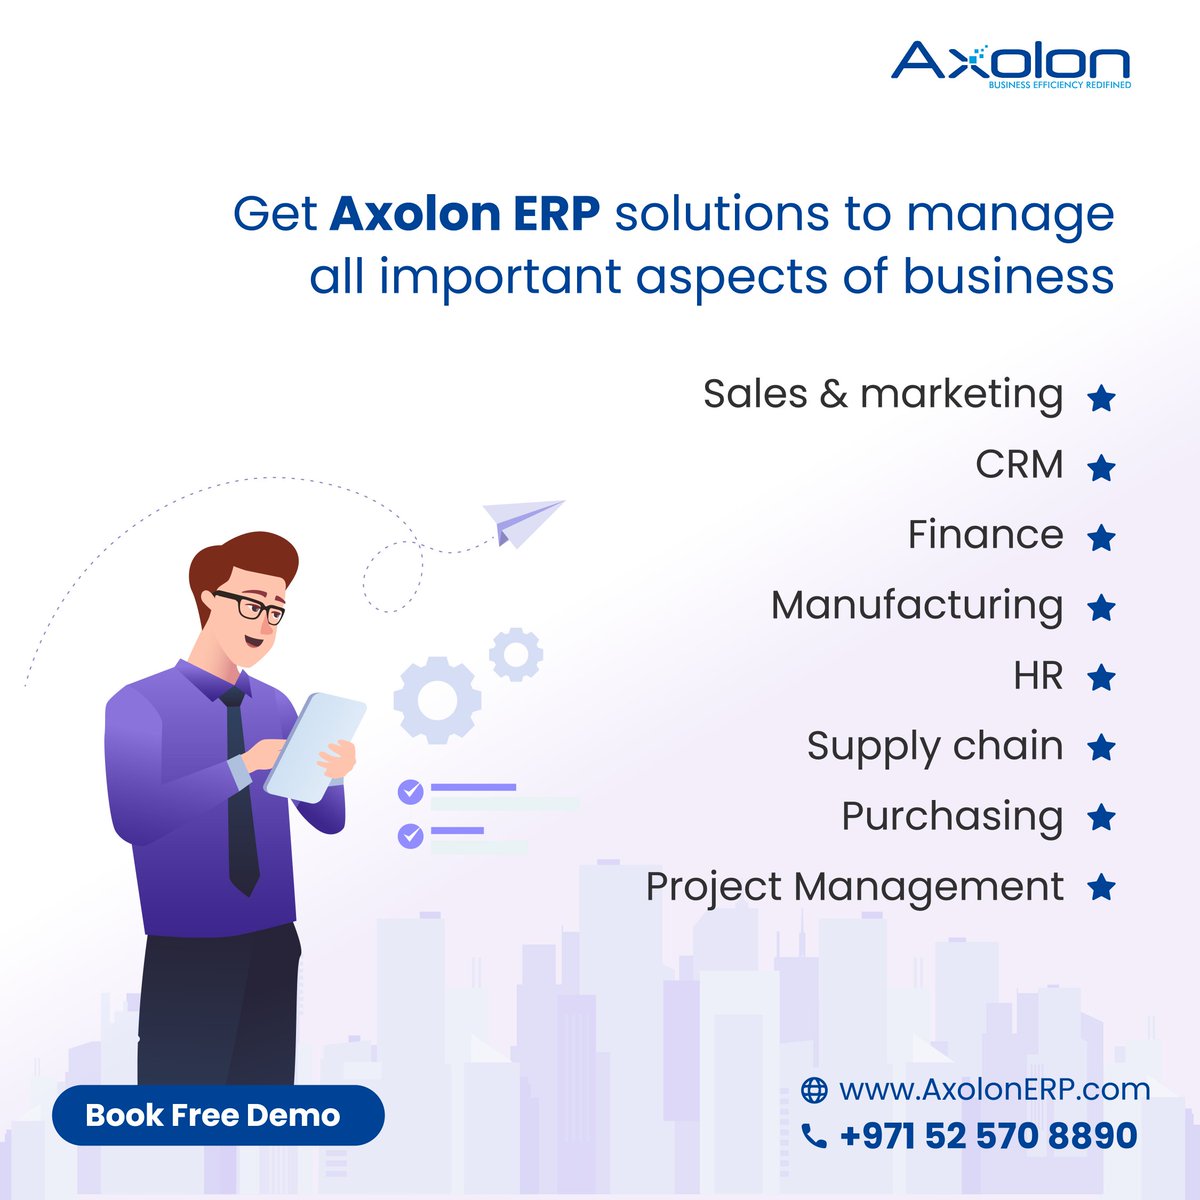 Axolon's cutting-edge ERP solution lets you experience the future of business administration. Innovate with confidence!

#ERP #ERPSoftware #ERPSolution #ERPSofwareSolution #Ecommerce #EcommerceStore #EcommerceERP #axolon #axolonerp #possoftware #erpcompany #erpsolutionprovider